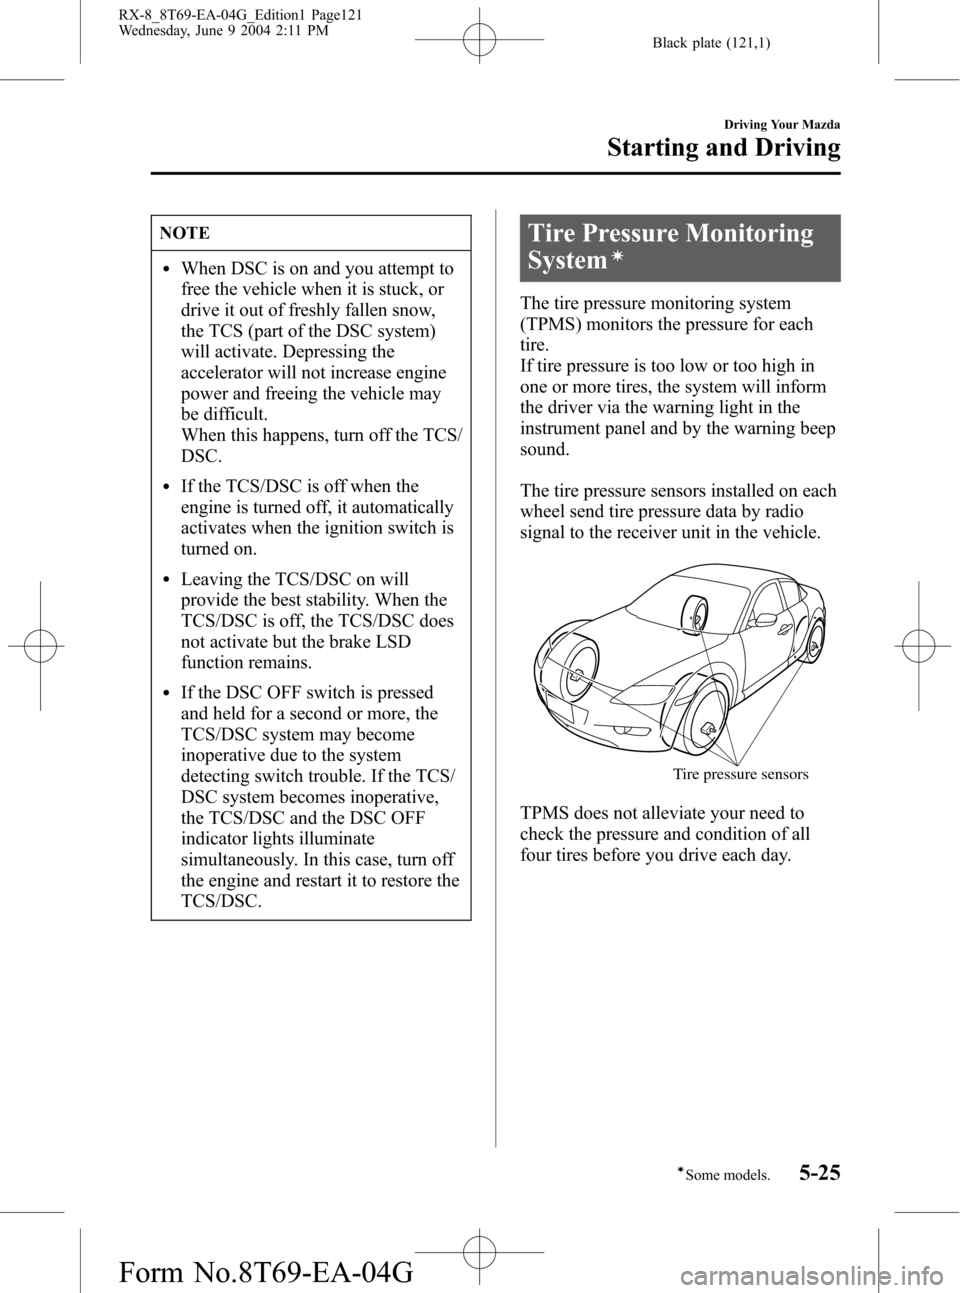 MAZDA MODEL RX 8 2005  Owners Manual (in English) Black plate (121,1)
NOTE
lWhen DSC is on and you attempt to
free the vehicle when it is stuck, or
drive it out of freshly fallen snow,
the TCS (part of the DSC system)
will activate. Depressing the
ac